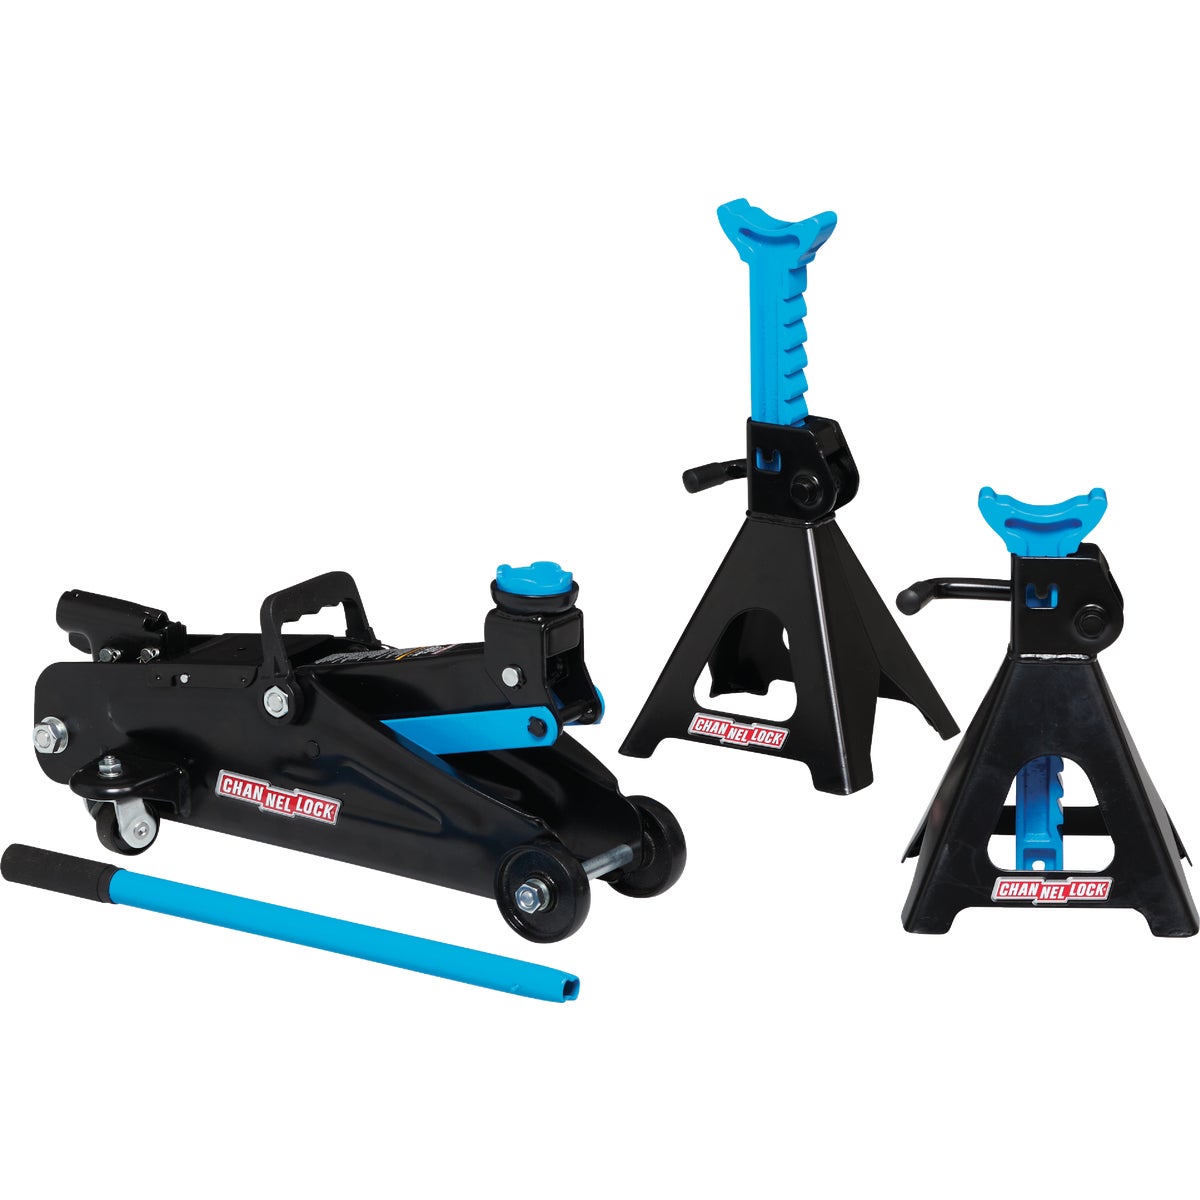 Channellock 2-Ton Floor Jack and Jack Stand Kit